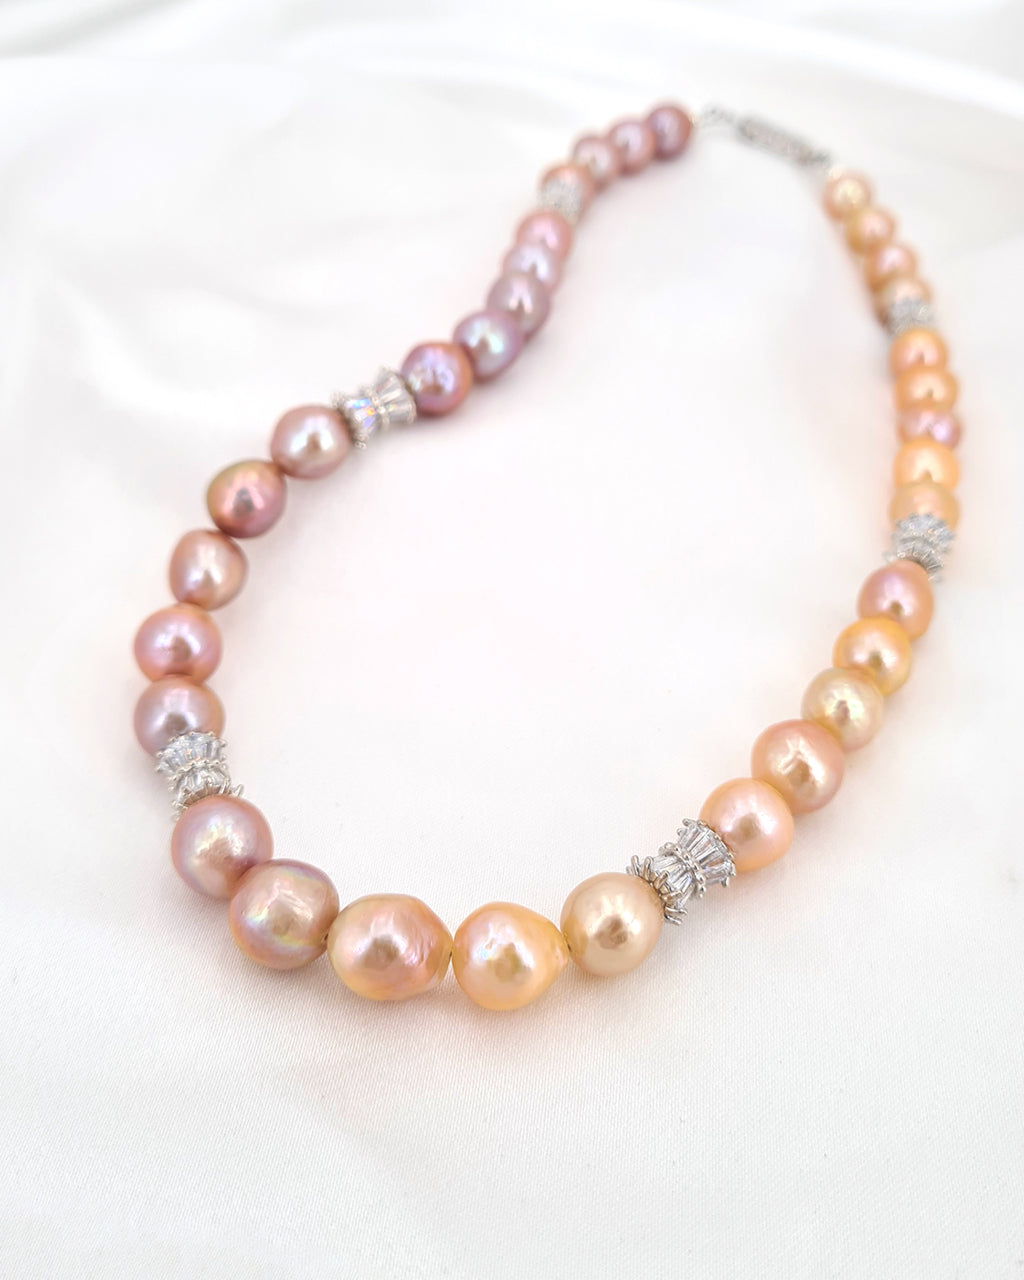 Graduated Freshwater Pearl Strand Necklace | Metallic Gold Peach to Purple